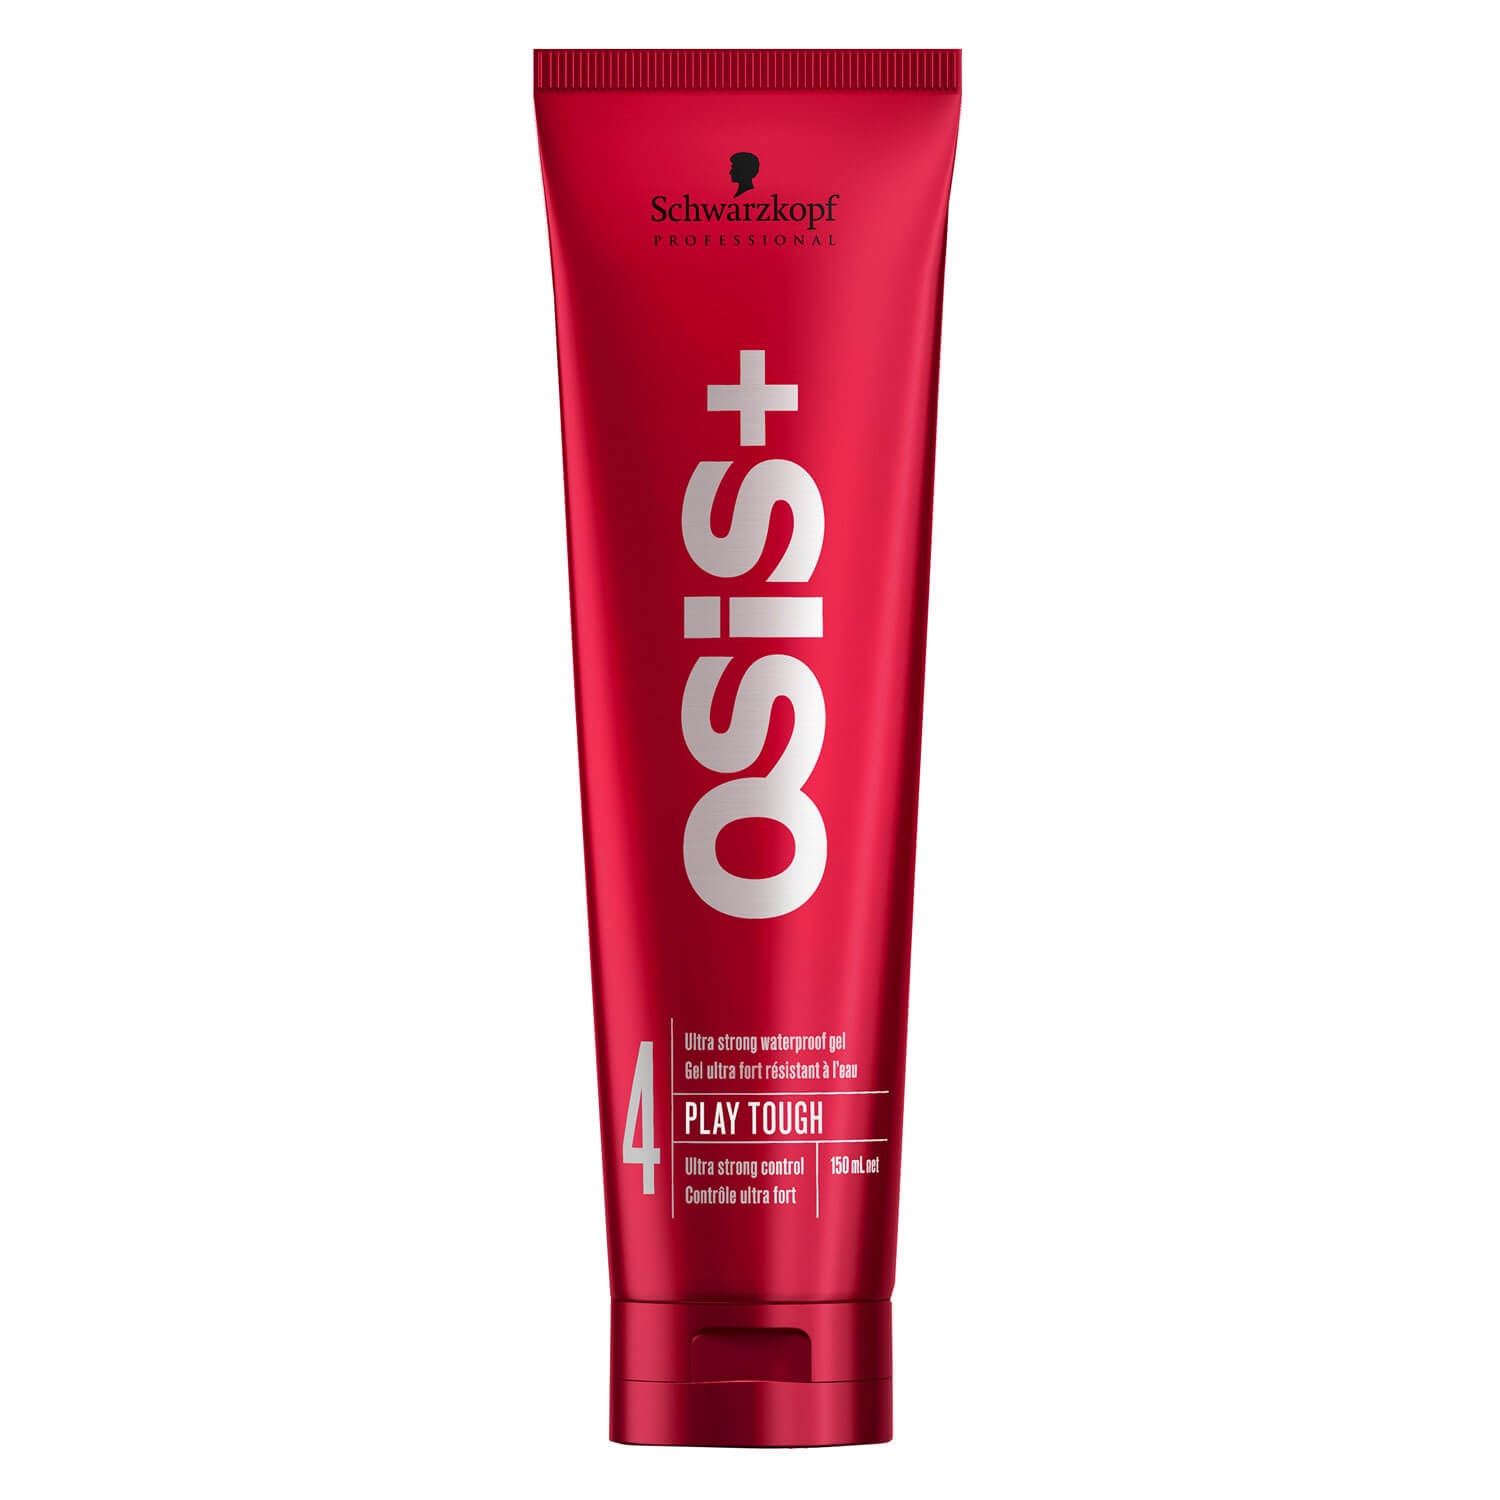 Product image from Osis - Play Tough Ultra Strong Waterproof Gel